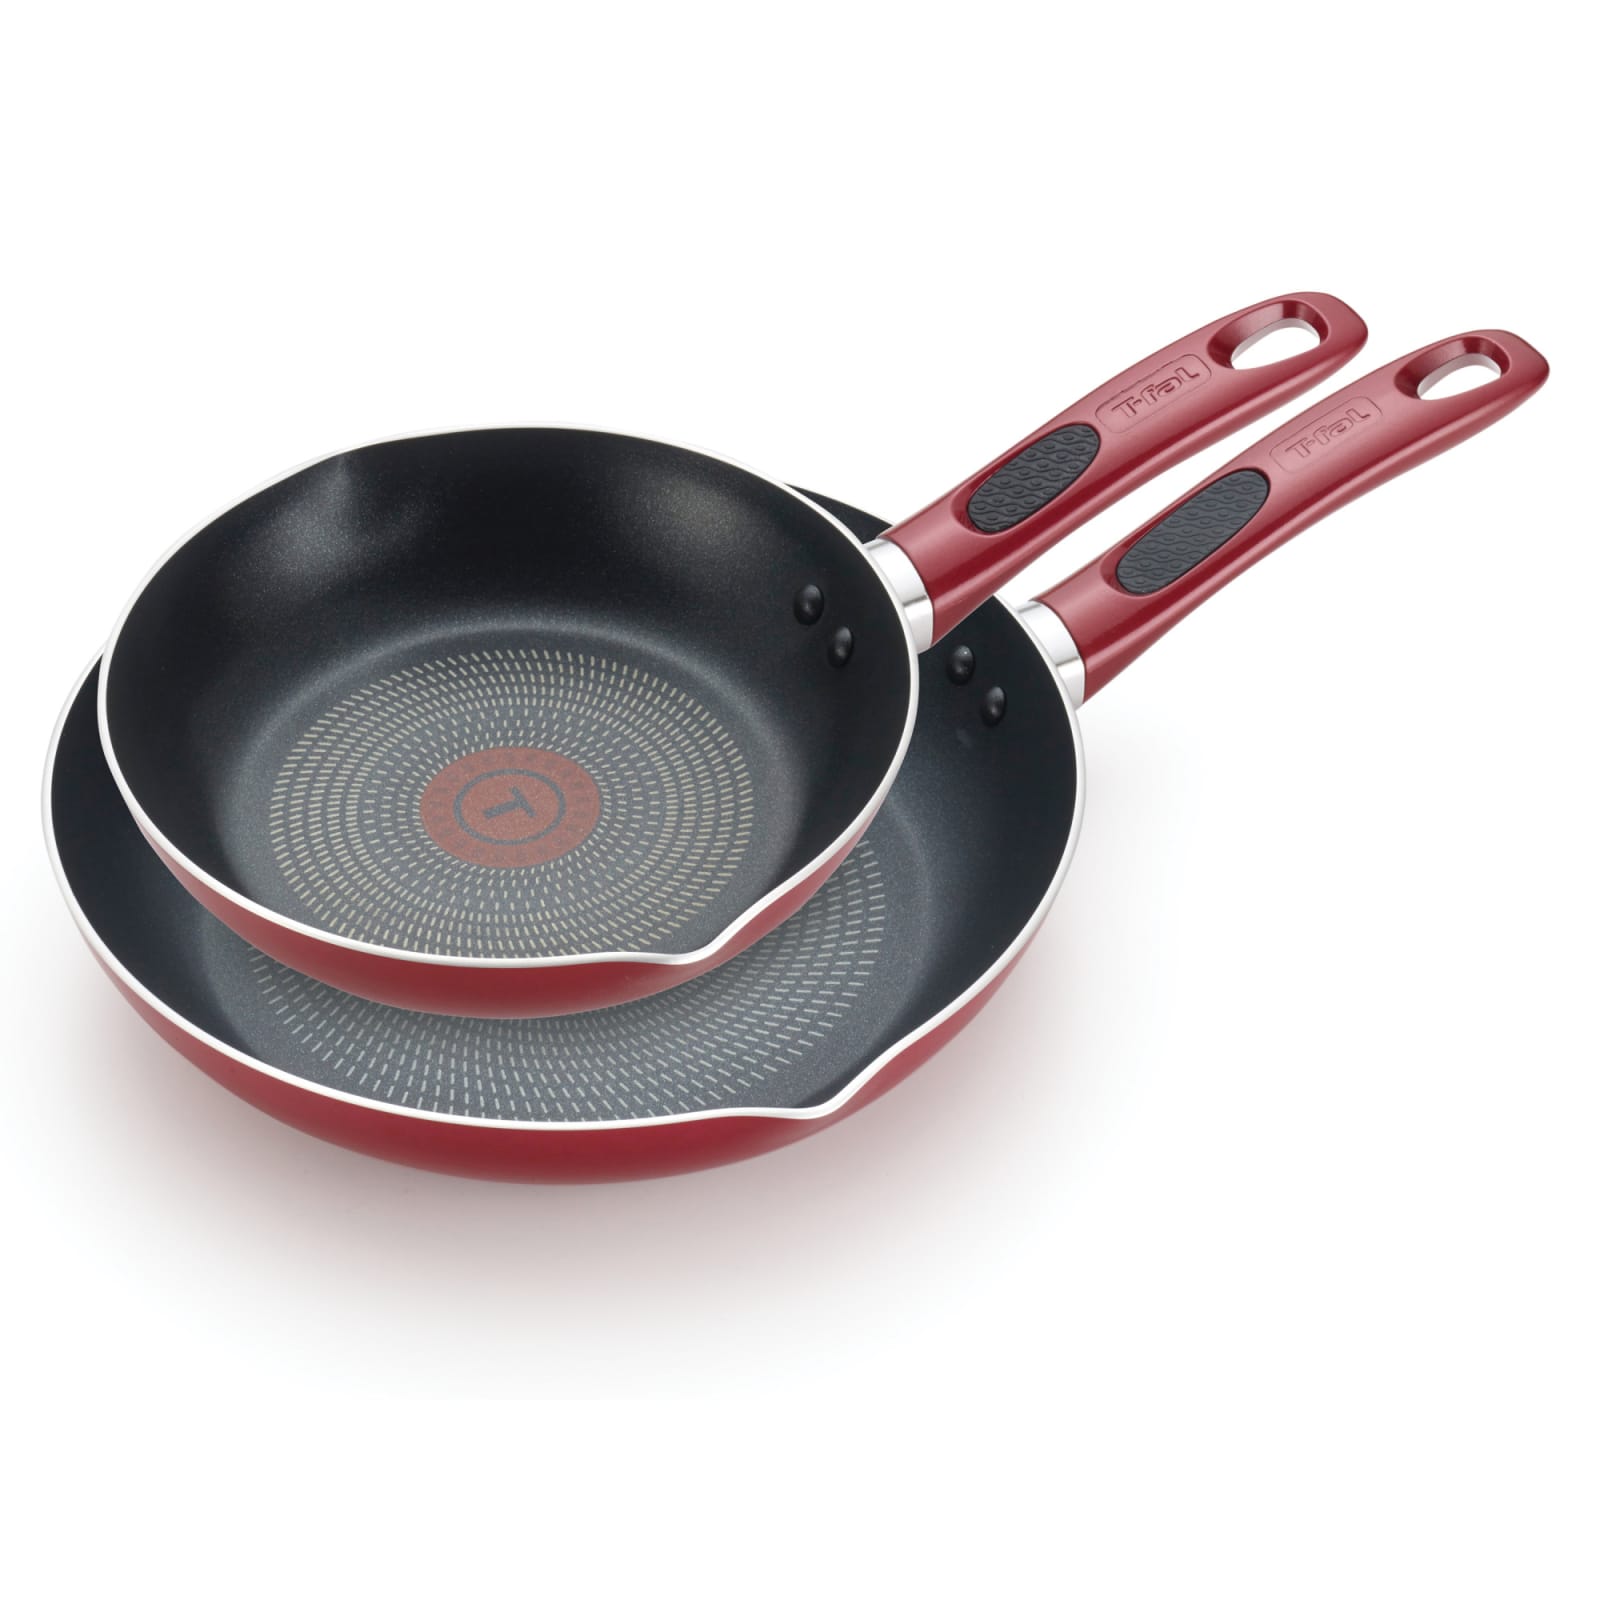 Excite 14 Piece Red Non-Stick Cookware Set by T-fal at Fleet Farm